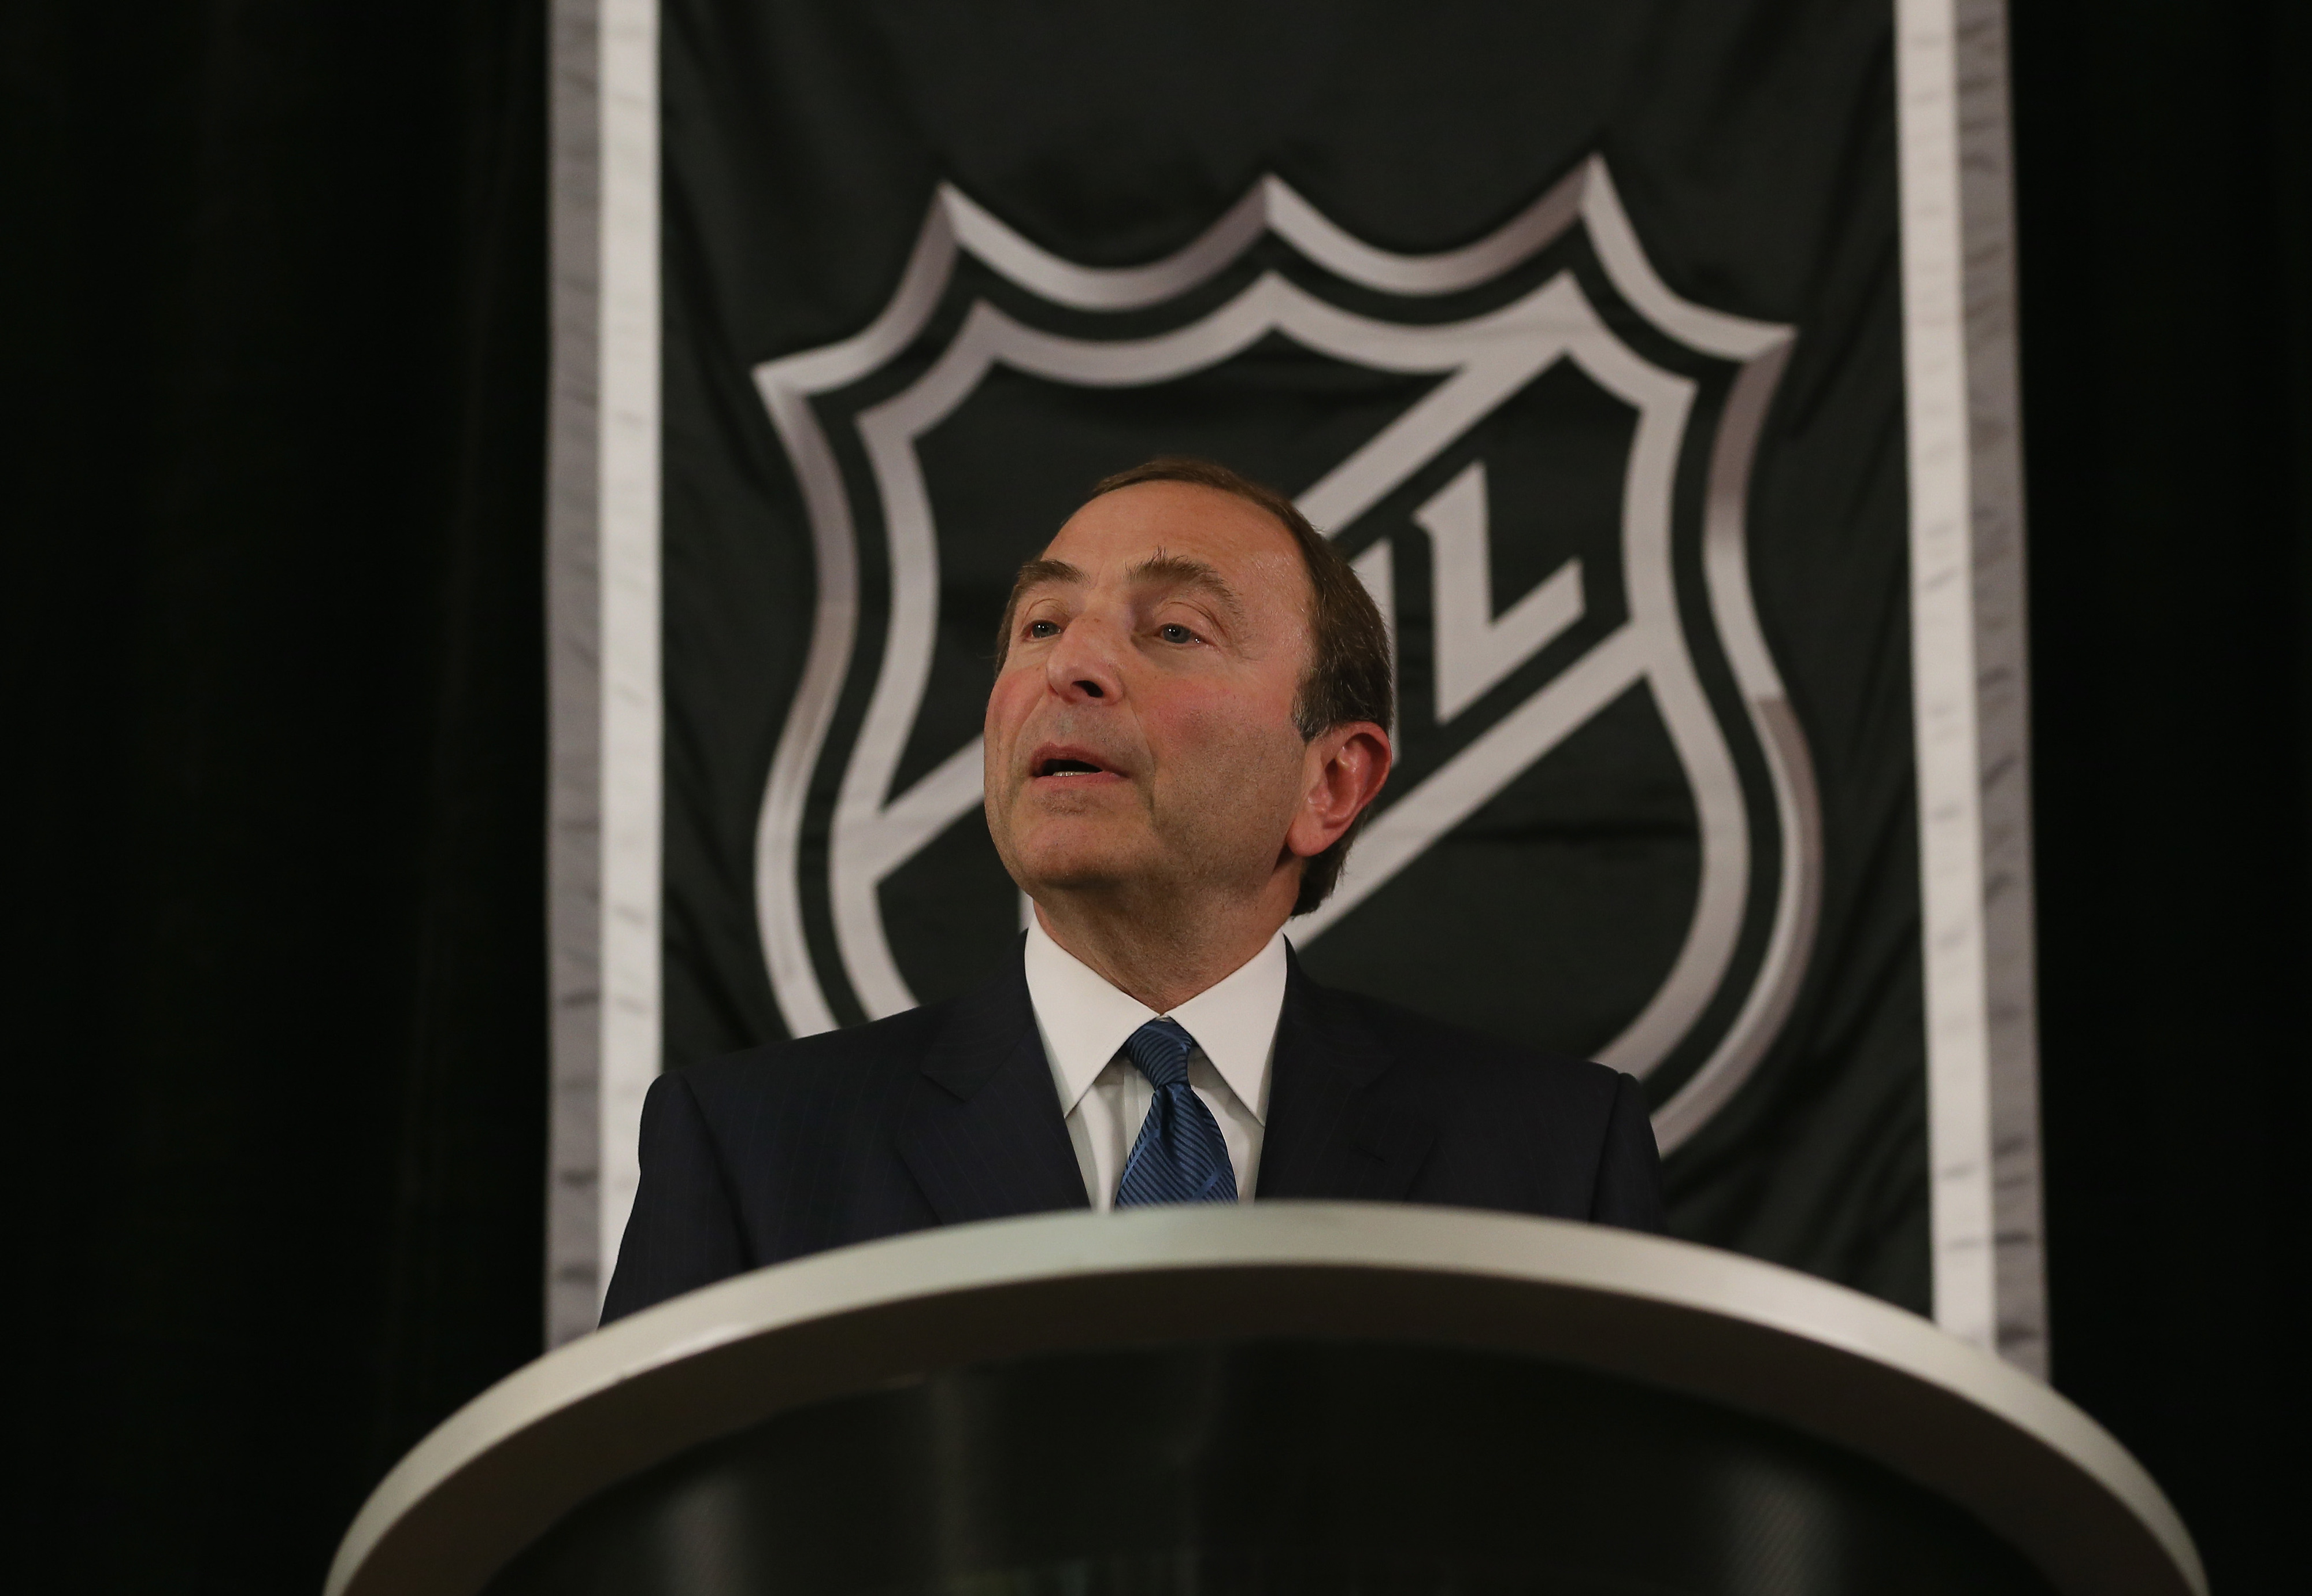 NEW YORK, NY - SEPTEMBER 13:  Commissioner Gary Bettman of the National Hockey League speaks to the media at Crowne Plaza Times Square on September 13, 2012 in New York City.  (Photo by Bruce Bennett/Getty Images)